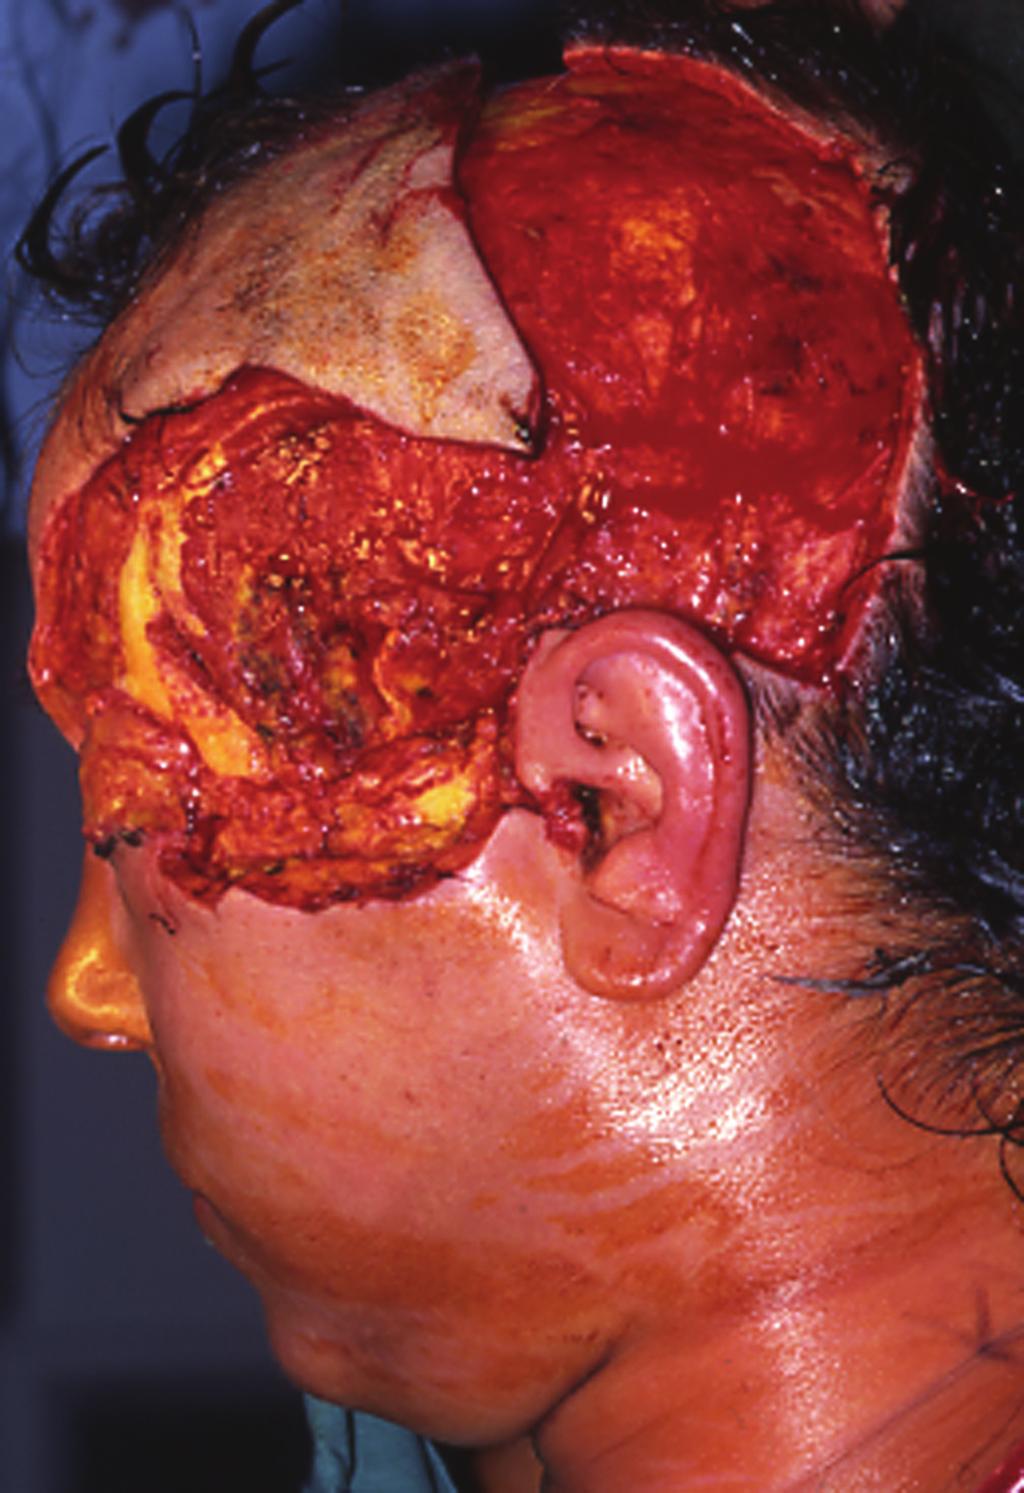 oedema. A large area of tissue had to be excised in order to arrest the progress of the infection.